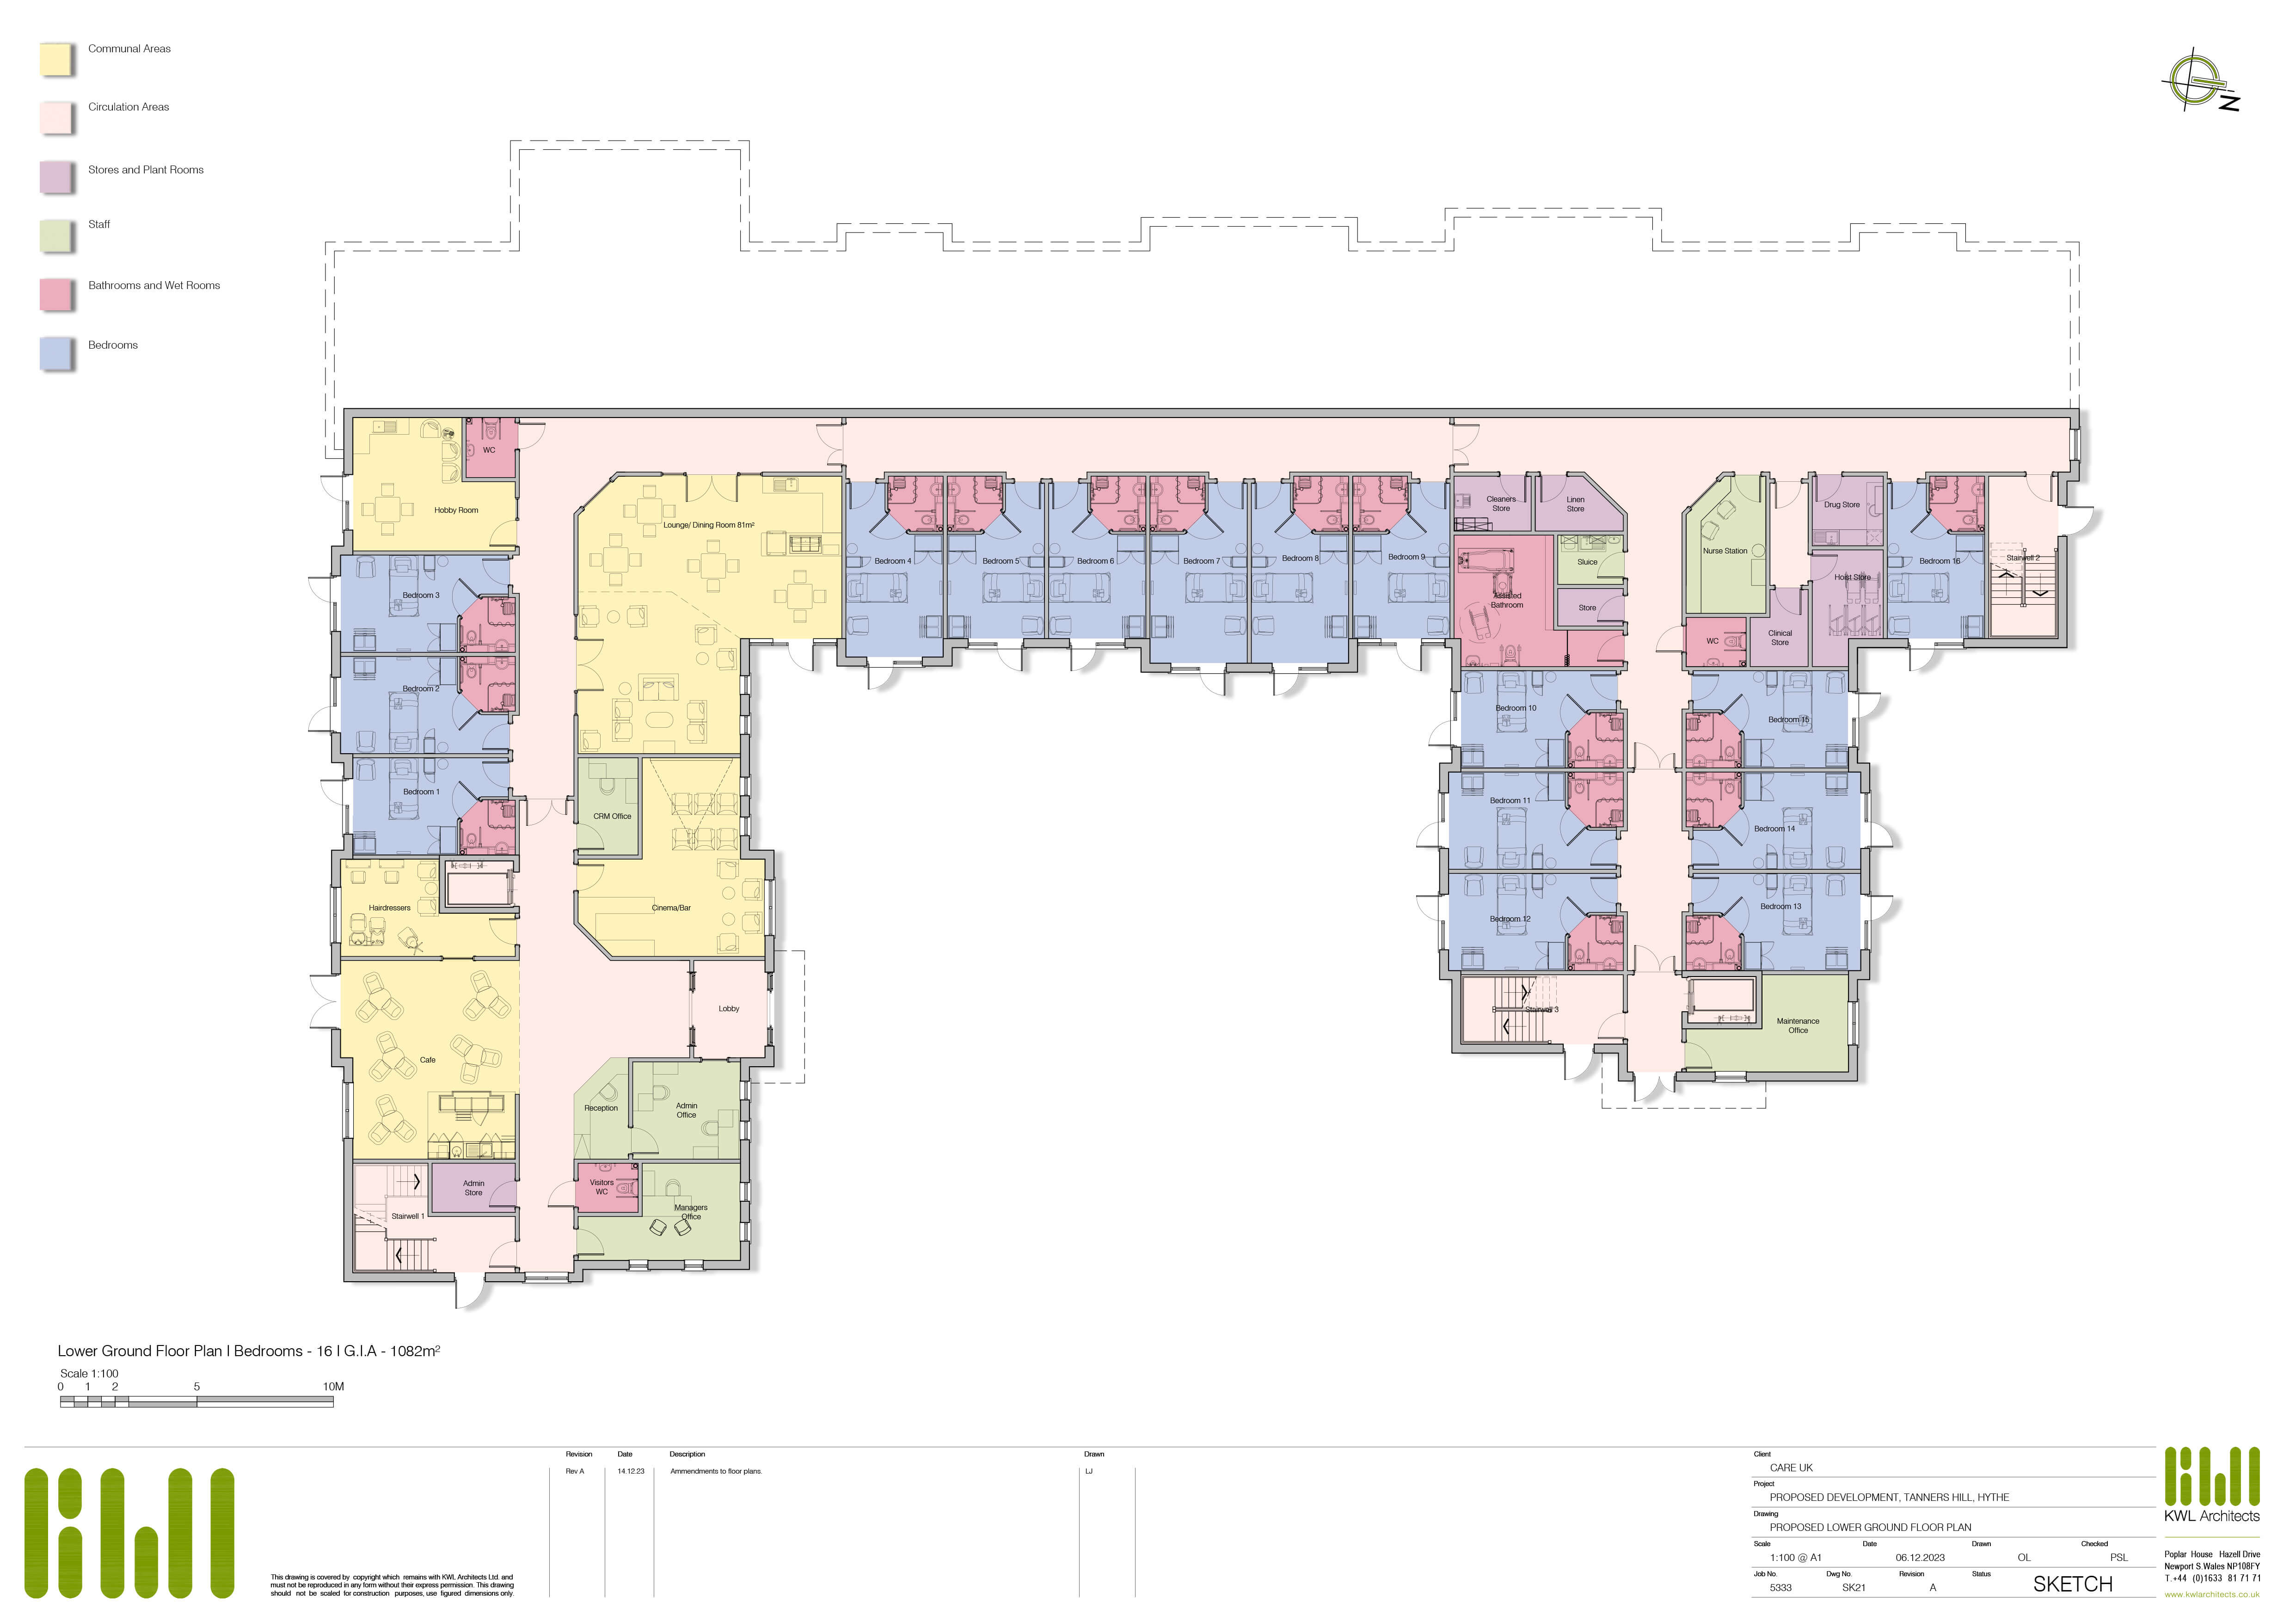 The site plan below shows the proposed lower ground floor layout